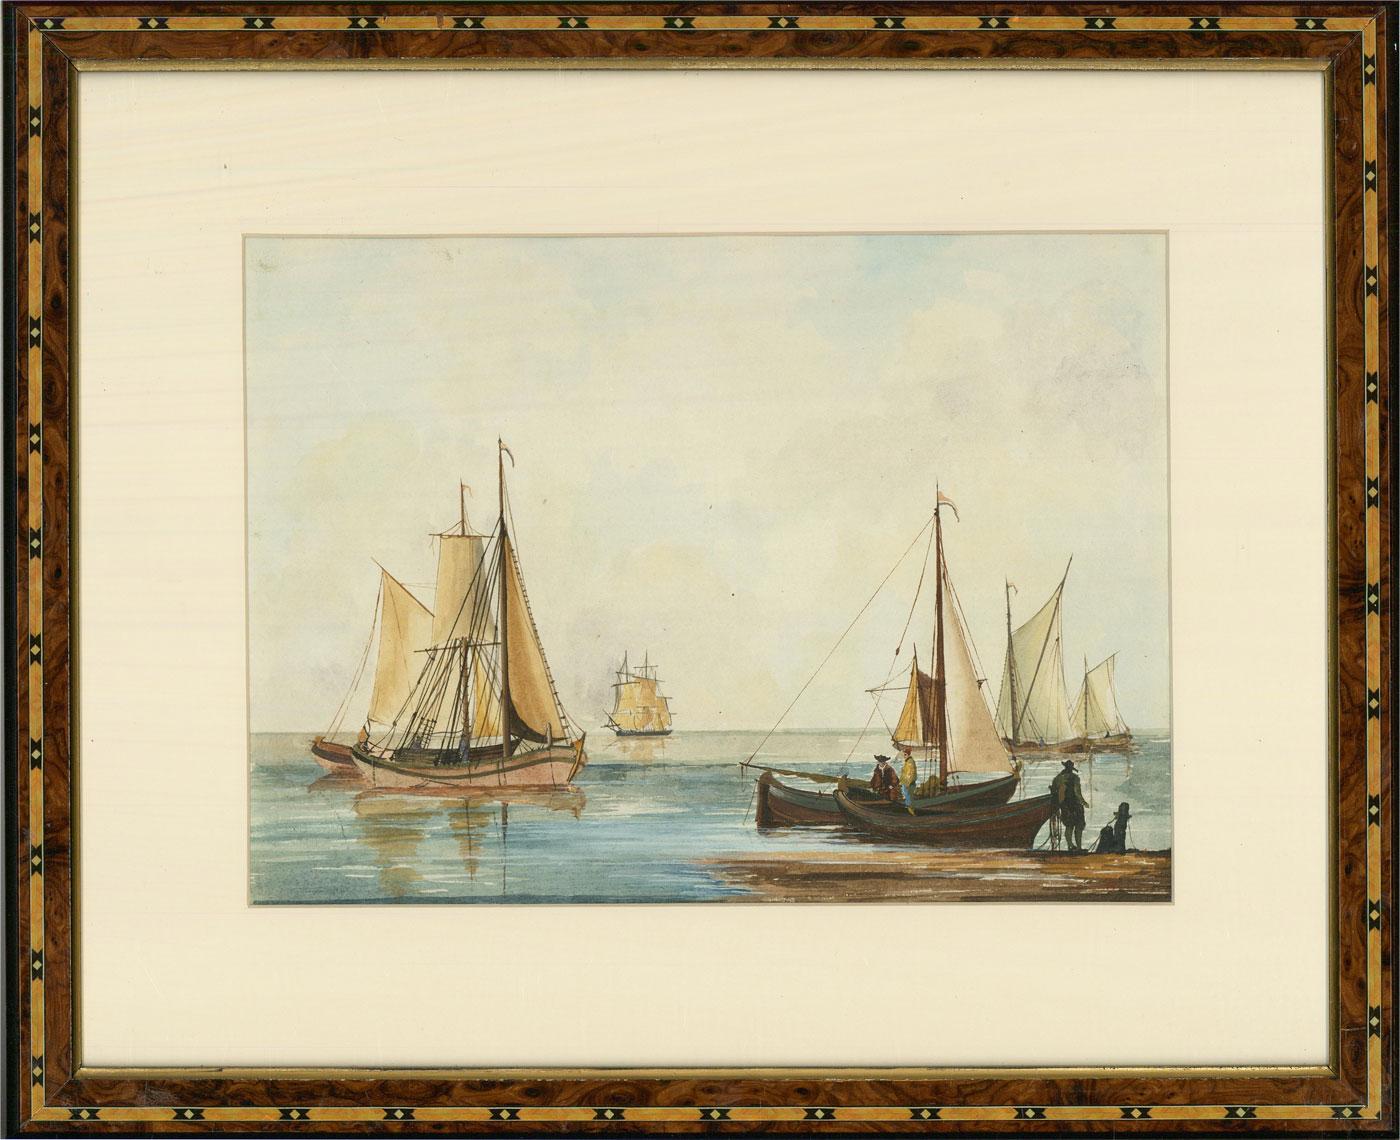 A harbour scene featuring sloops, cutters, and figures in the foreground. In the manner of William Anderson (1757-1837). Presented glazed in a clean white mount and a patterned burr wood effect frame. Unsigned. On wove.